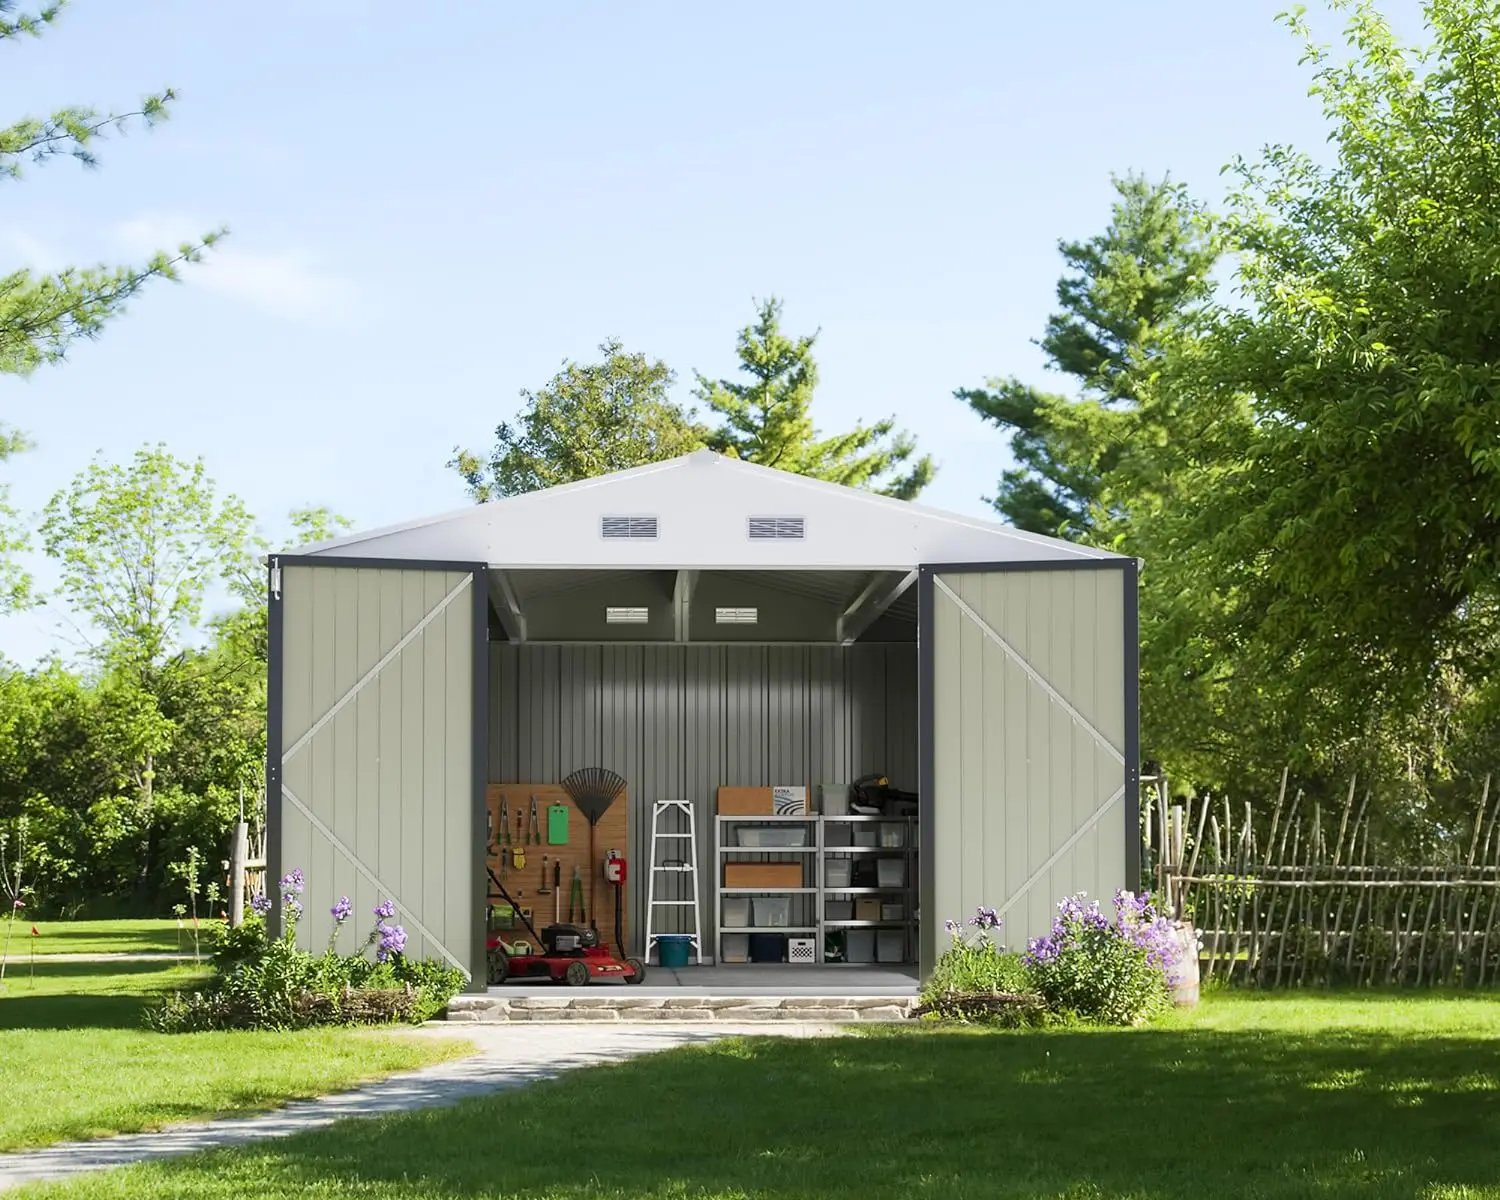 Outdoor storage shed 10 x 10 feet,steel utility tool shed storage room with door and lock, used for backyard garden terrace lawn